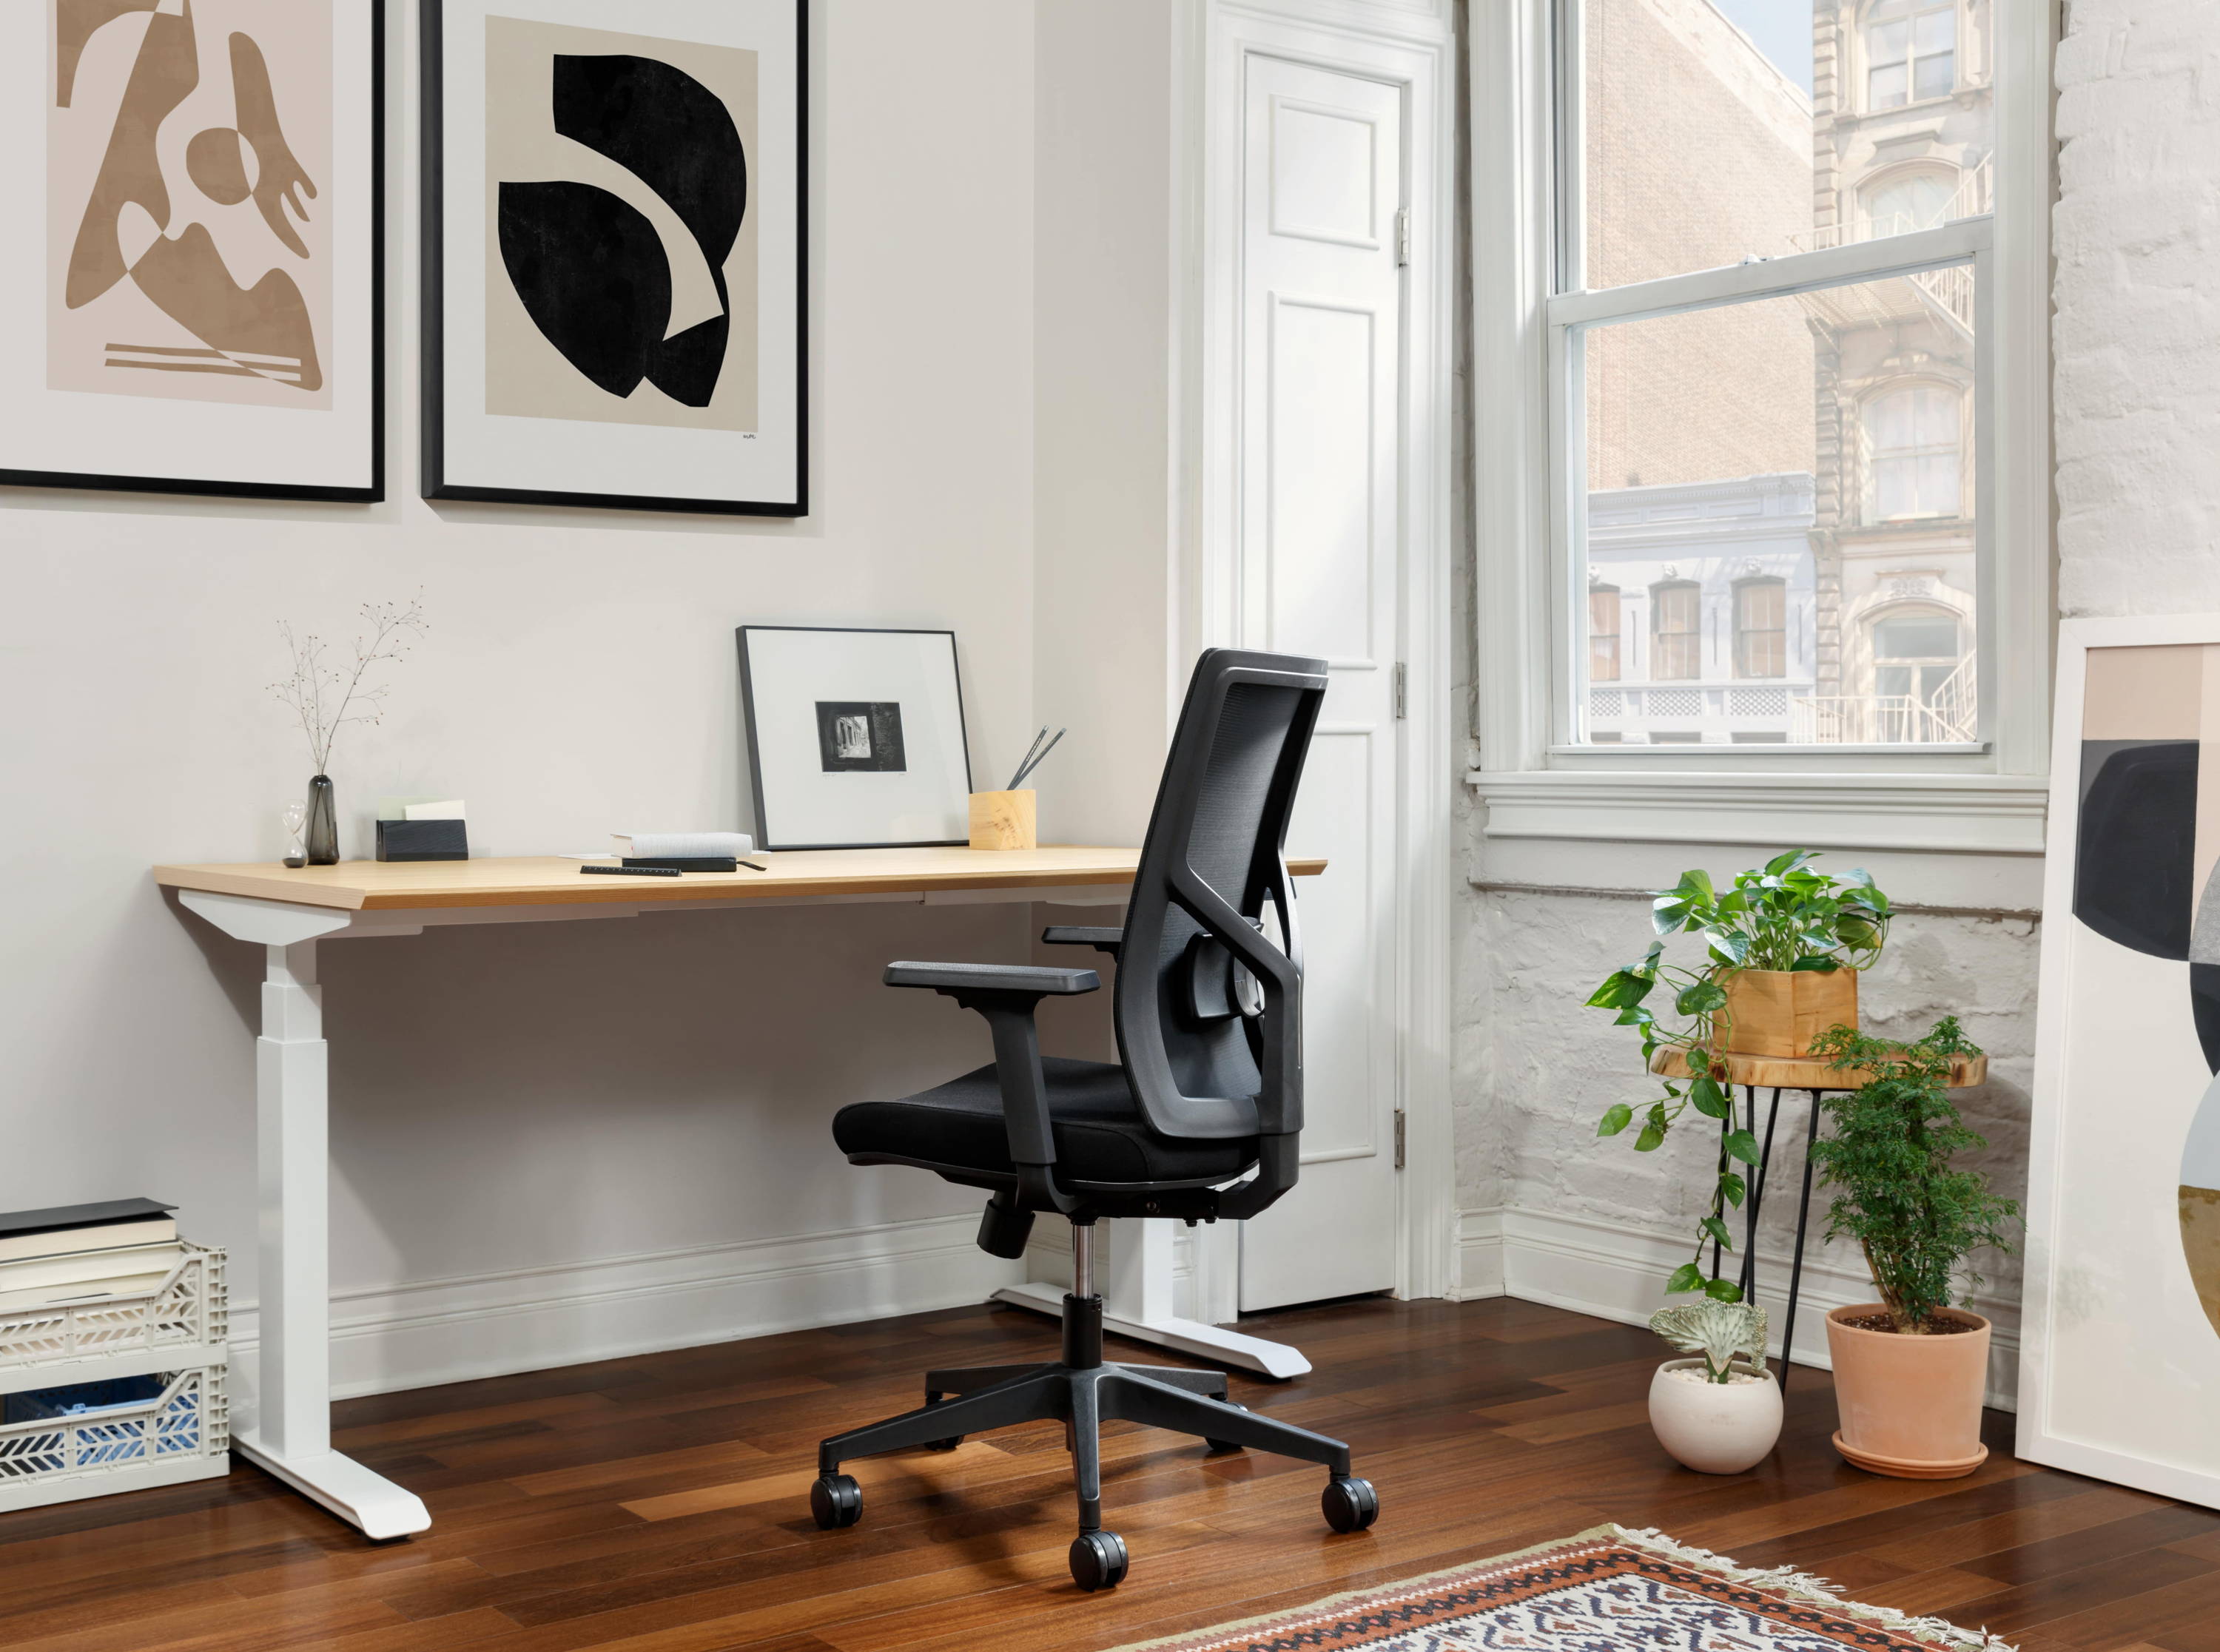 7 ergonomic gadgets to make your work-from-home office a lot more